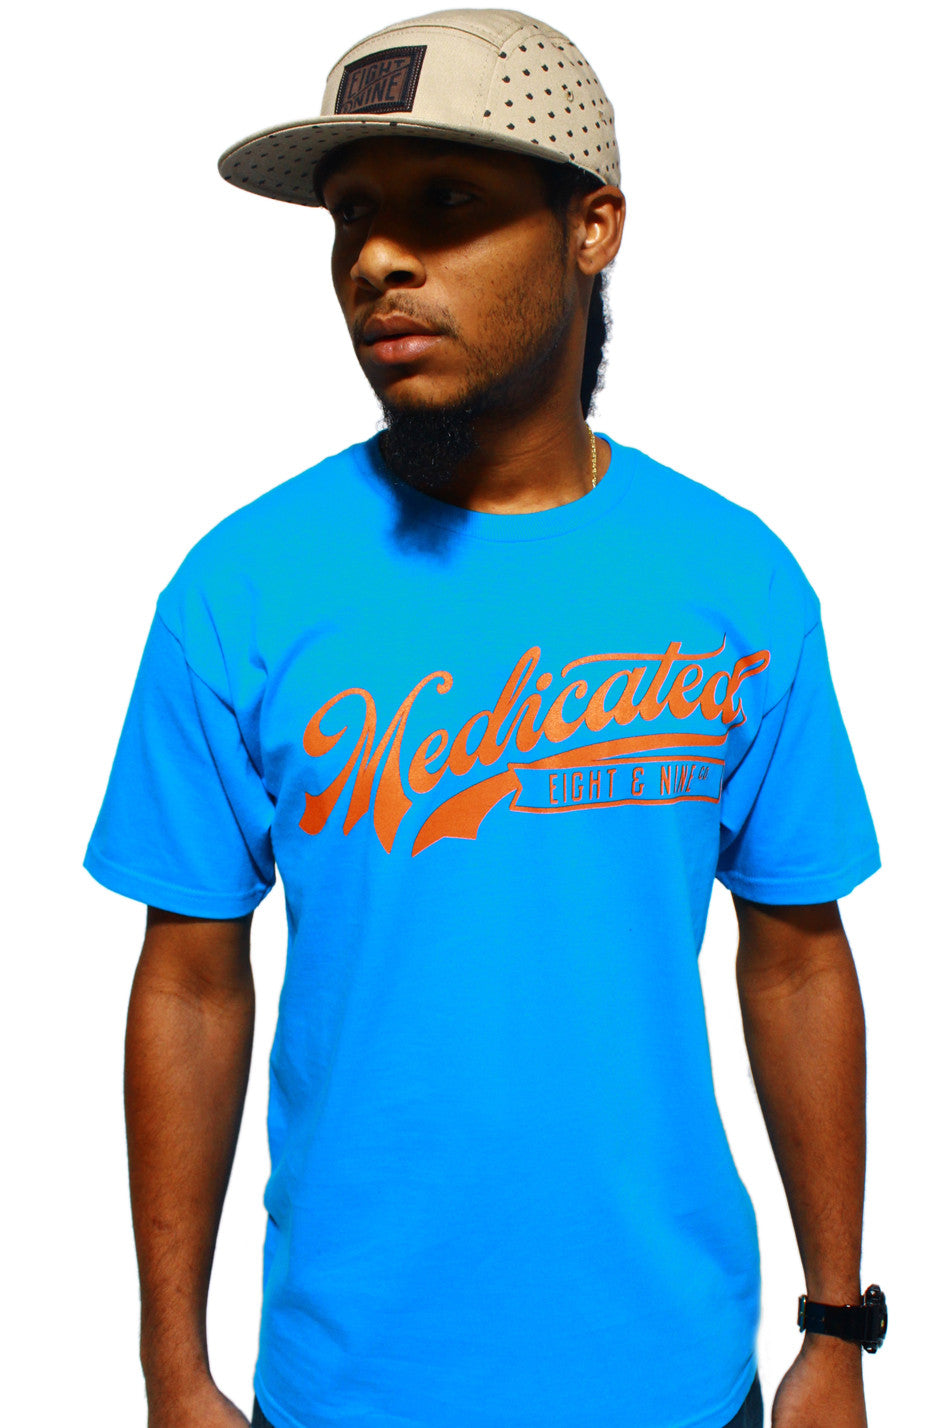 Team Medicated Dolphins T Shirt - 1